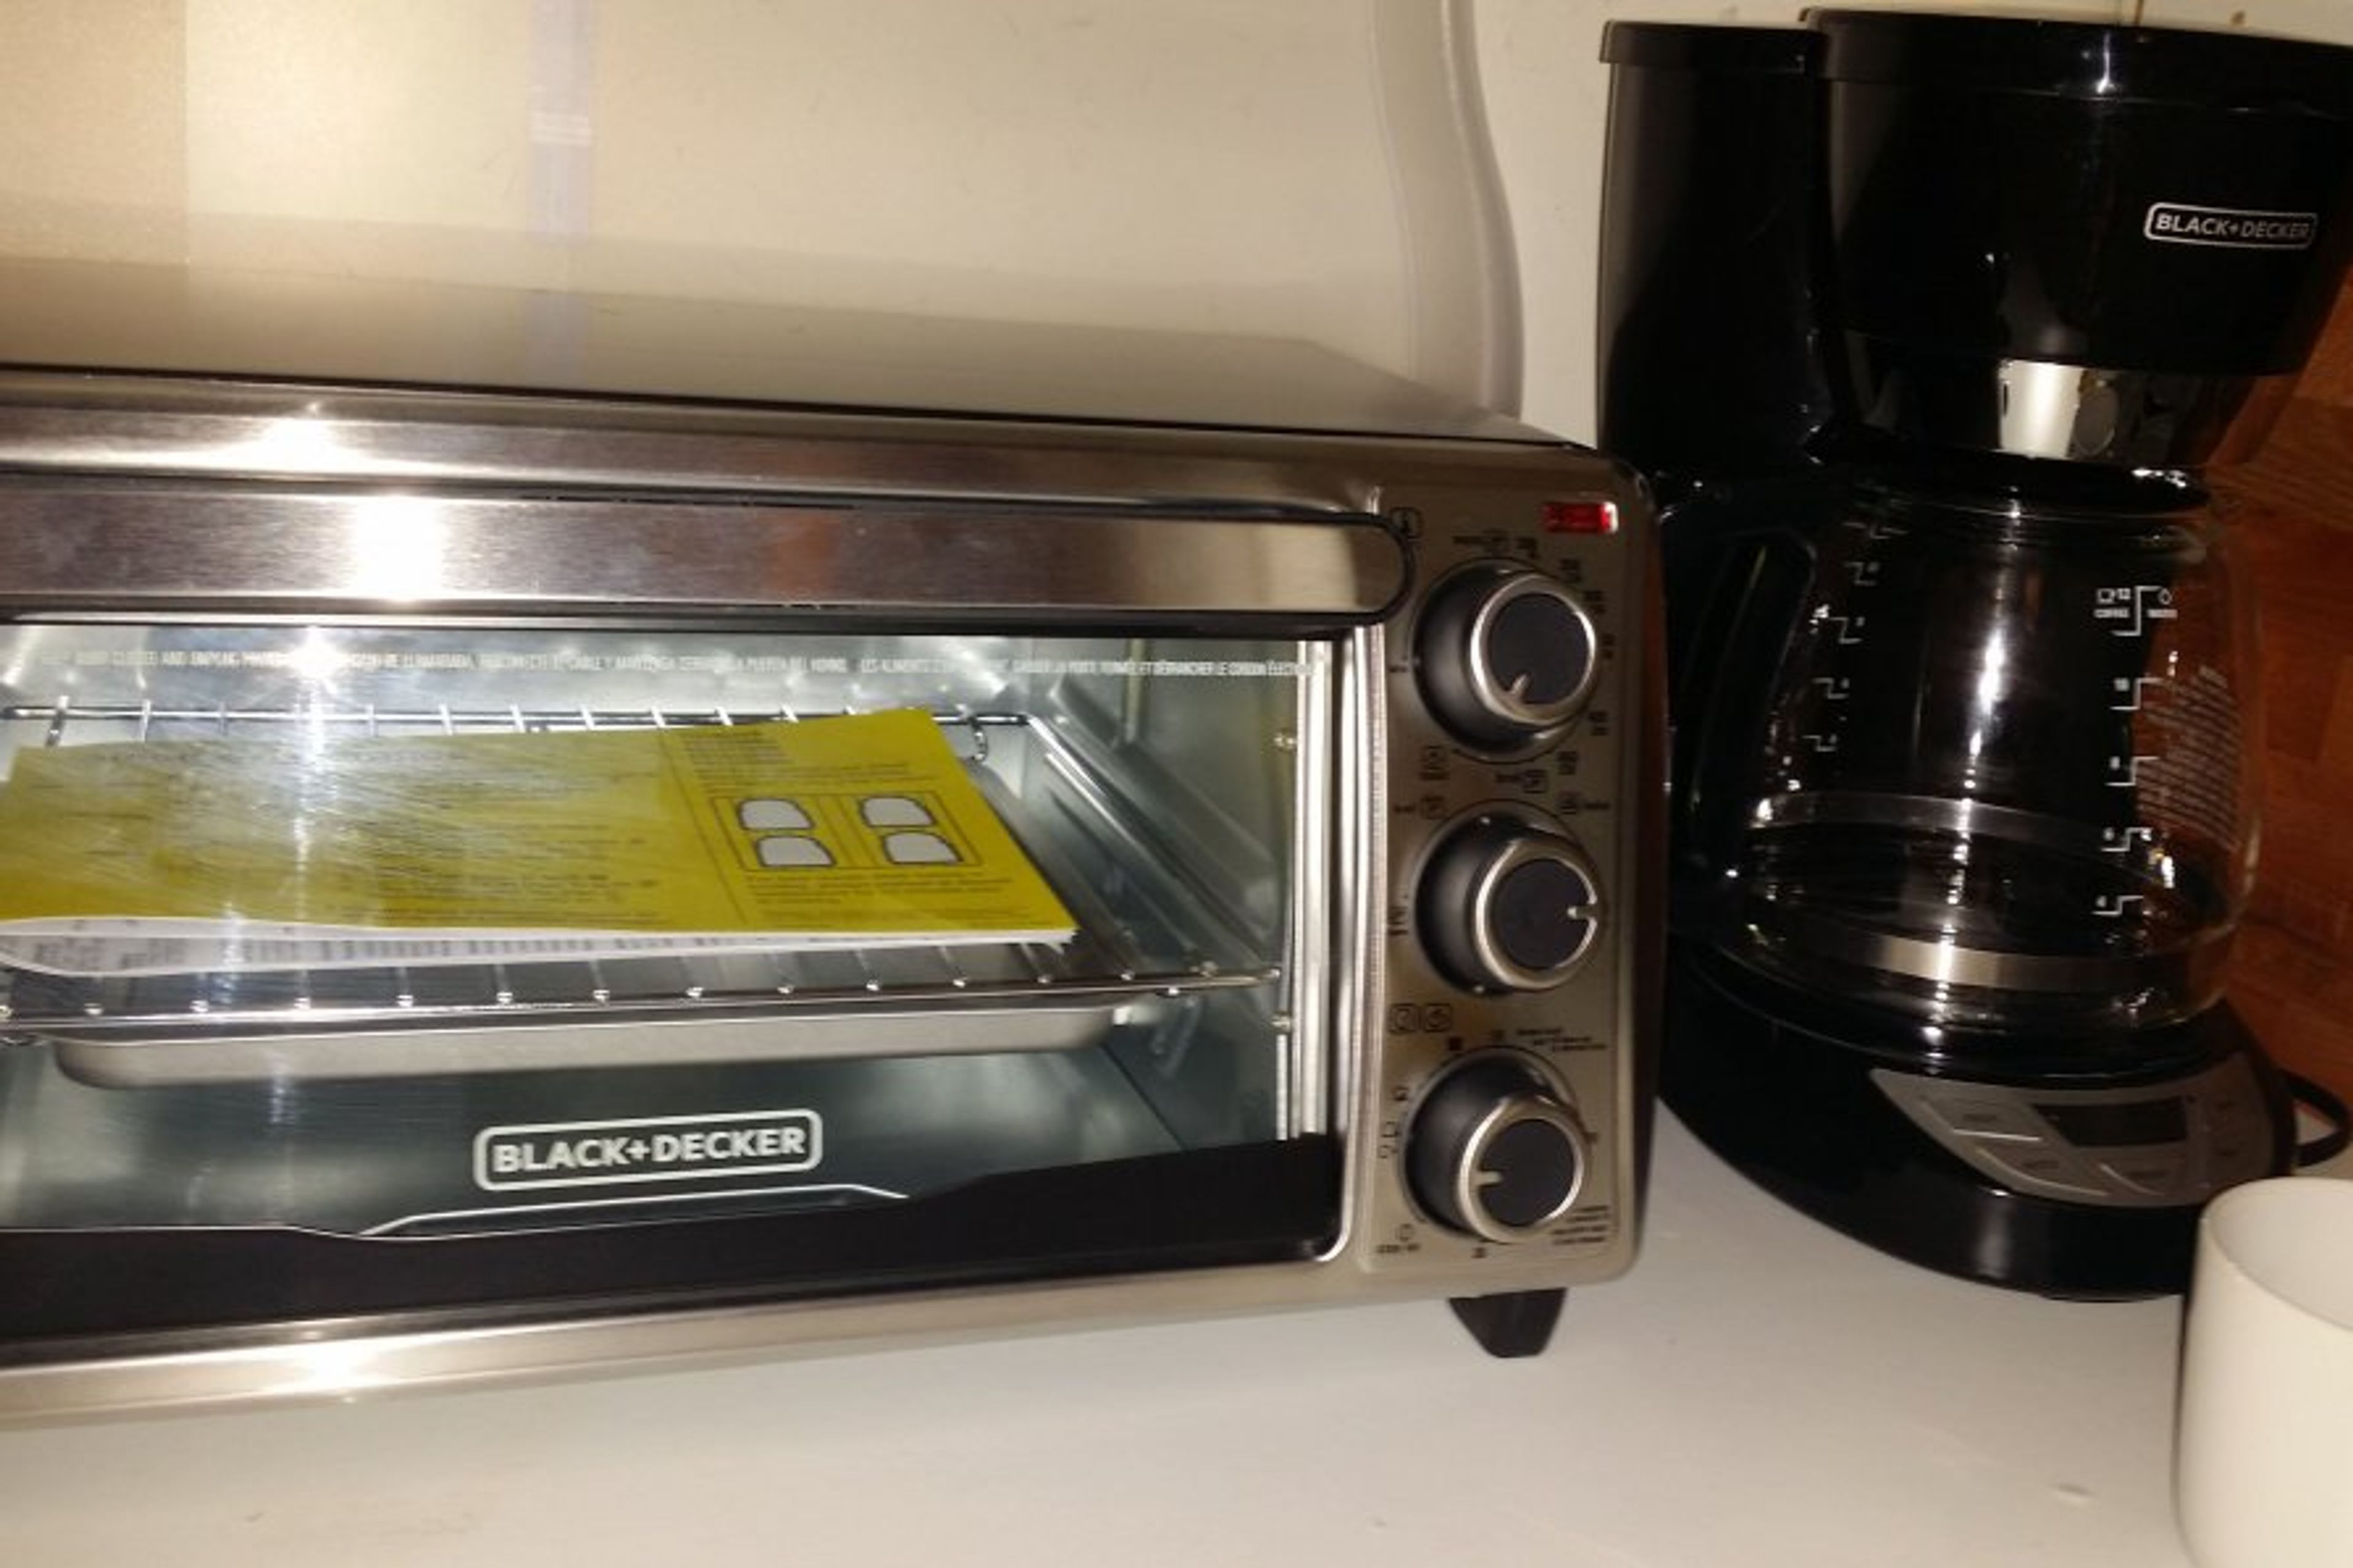 Coffee pot, microwave, electric oven